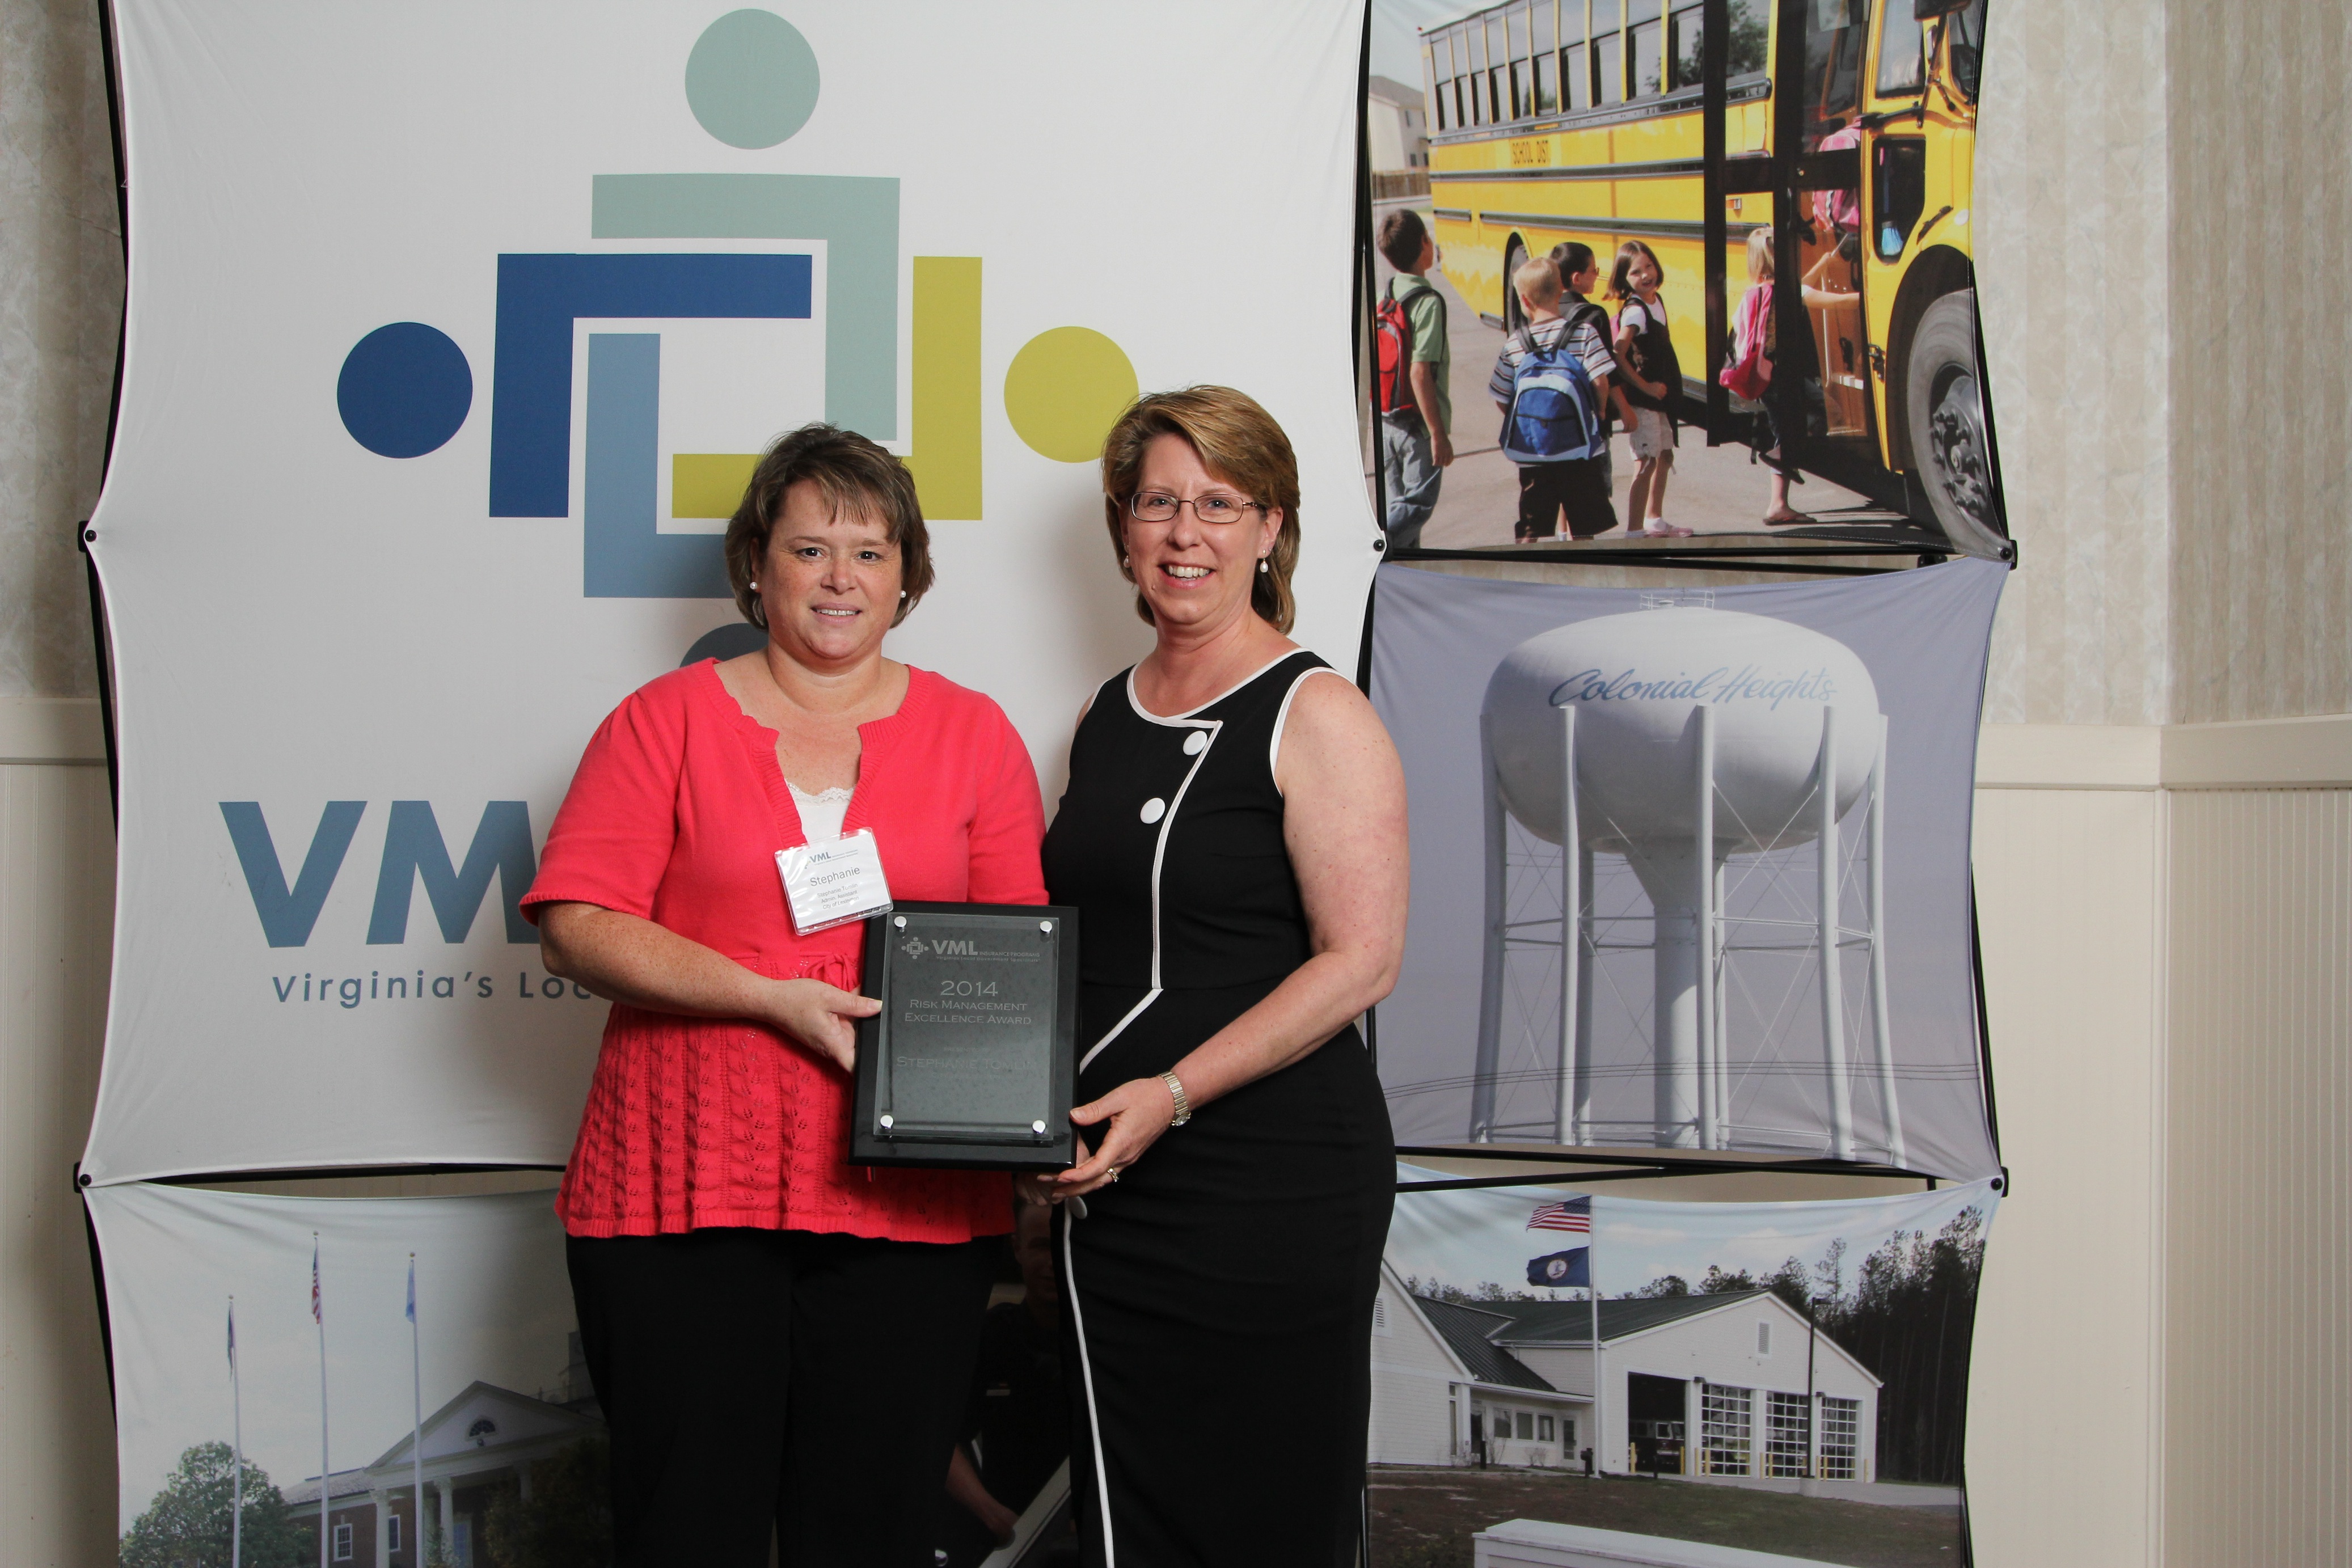 (L to R): Stephanie Tomlin with the City of Lexington and VMLIP Members’ Supervisory Board Chair Karen Pallansch